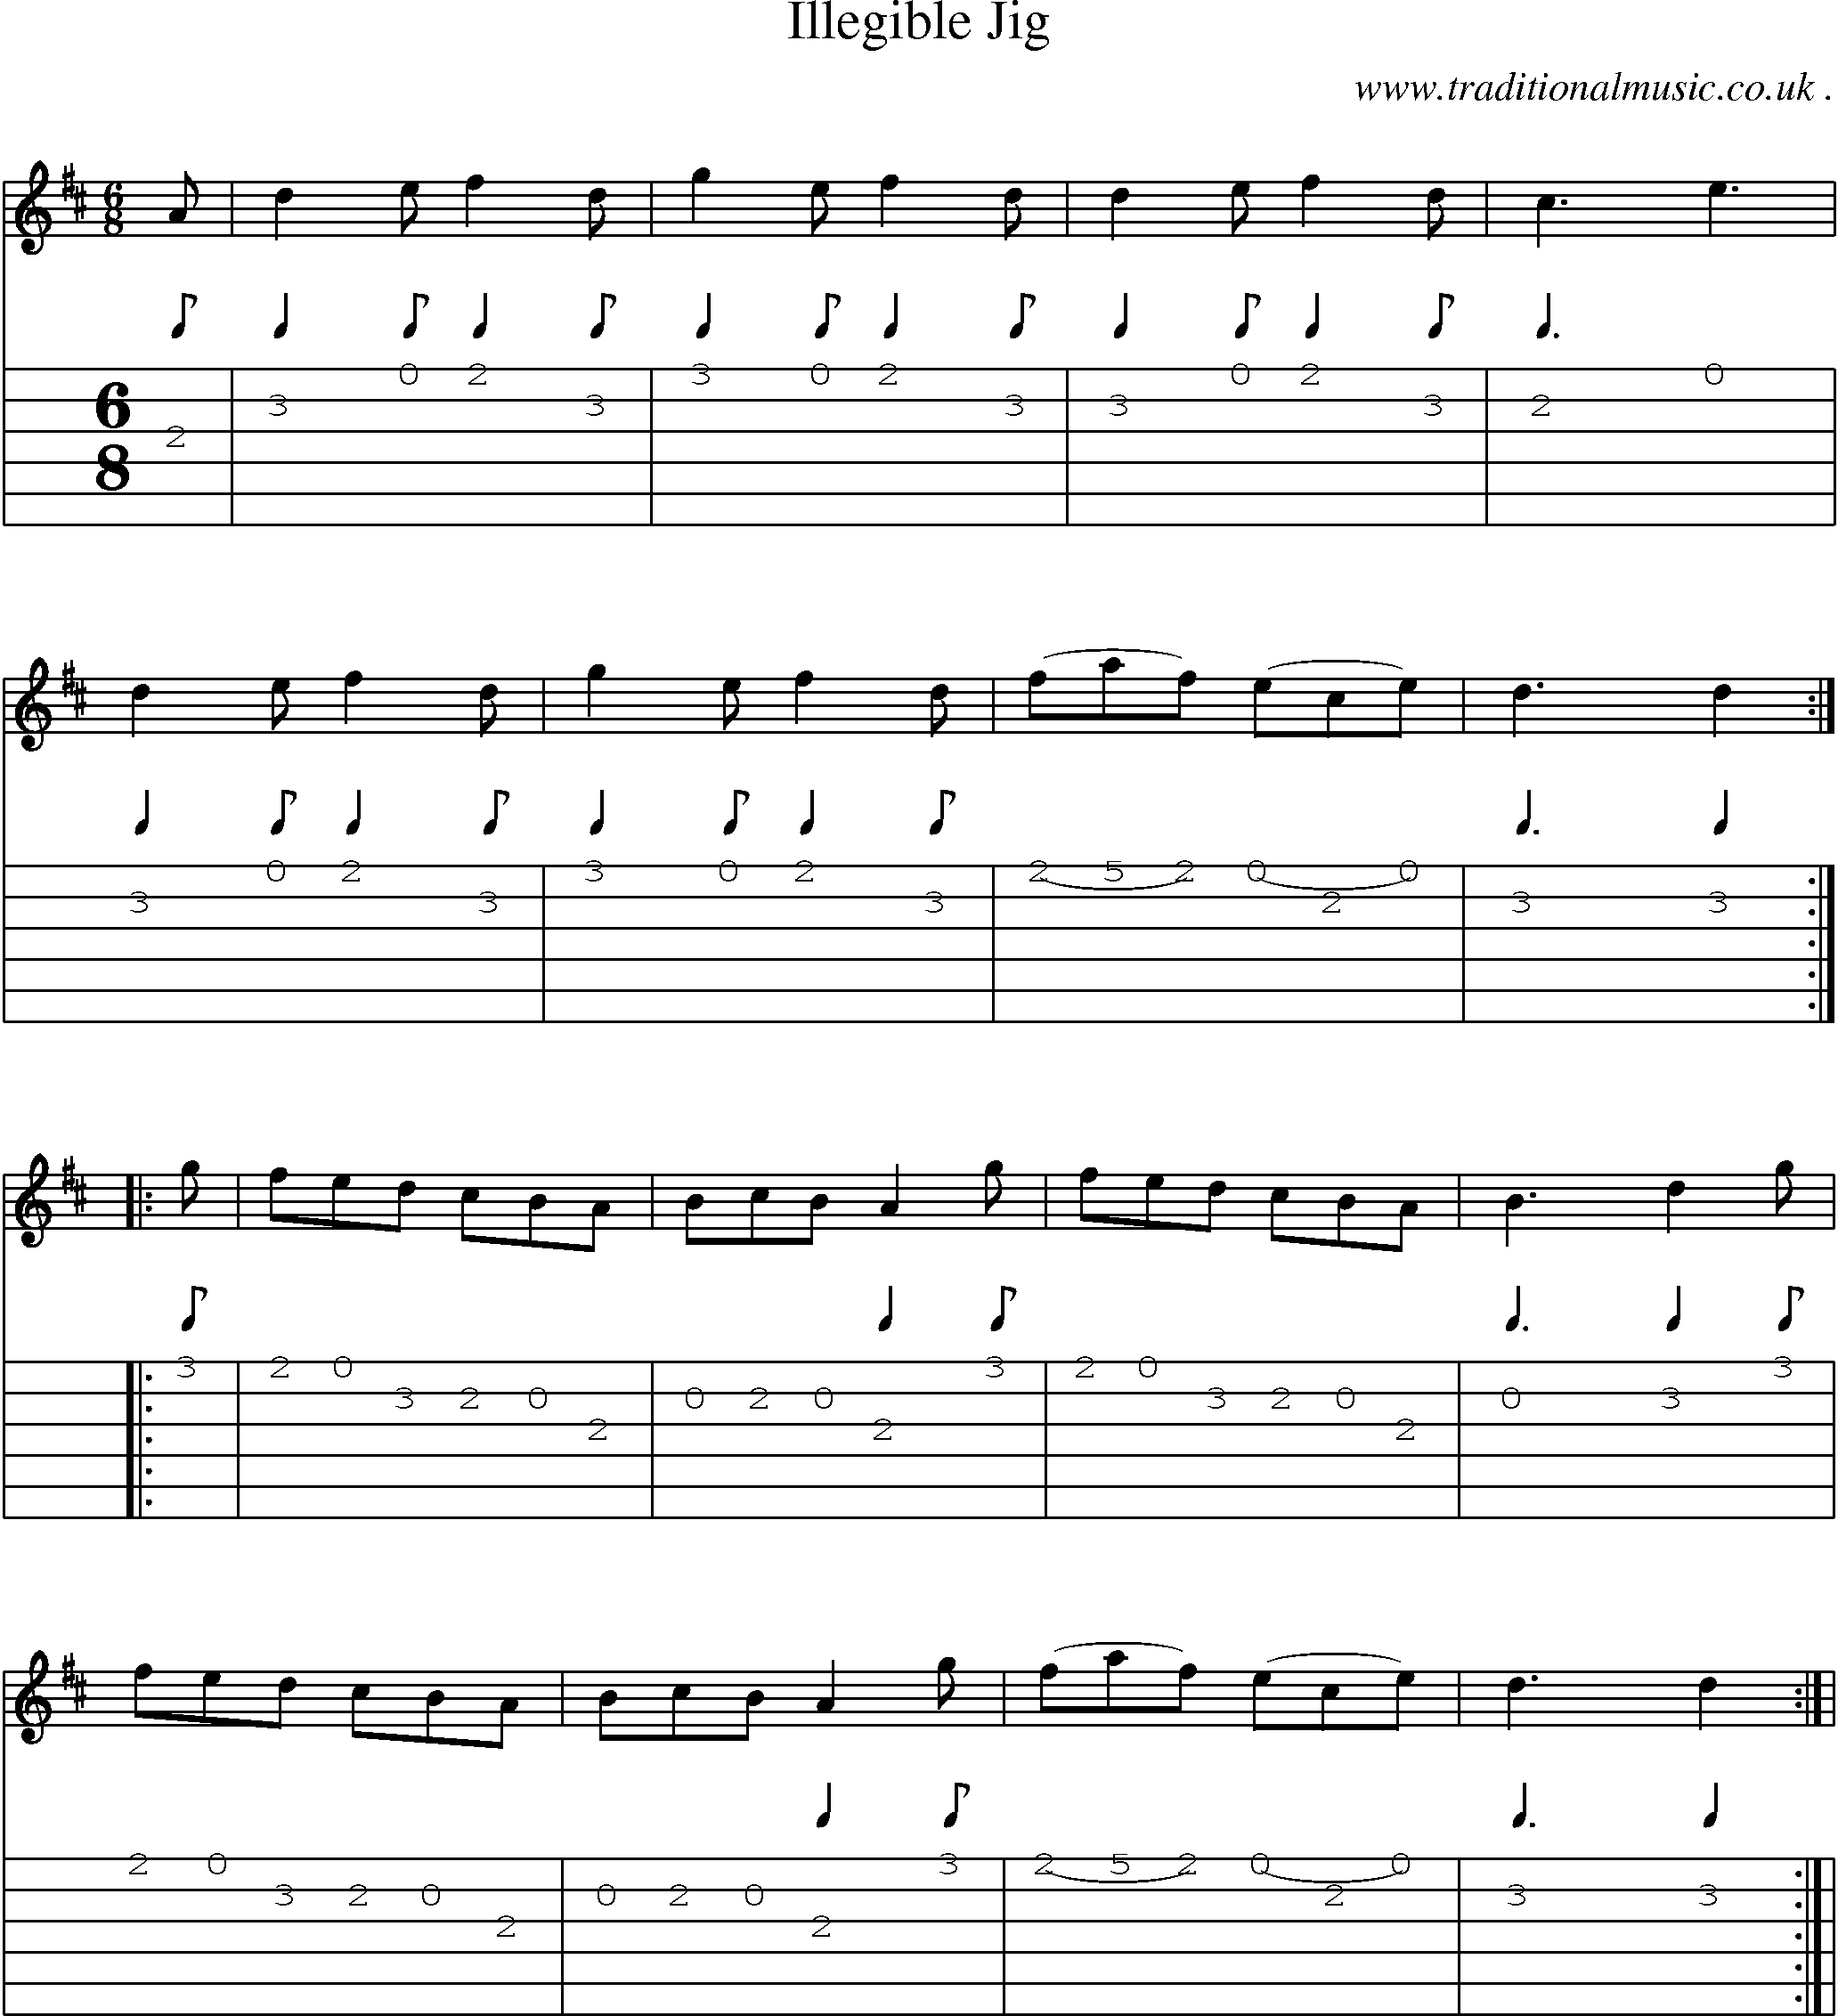 Sheet-Music and Guitar Tabs for Illegible Jig